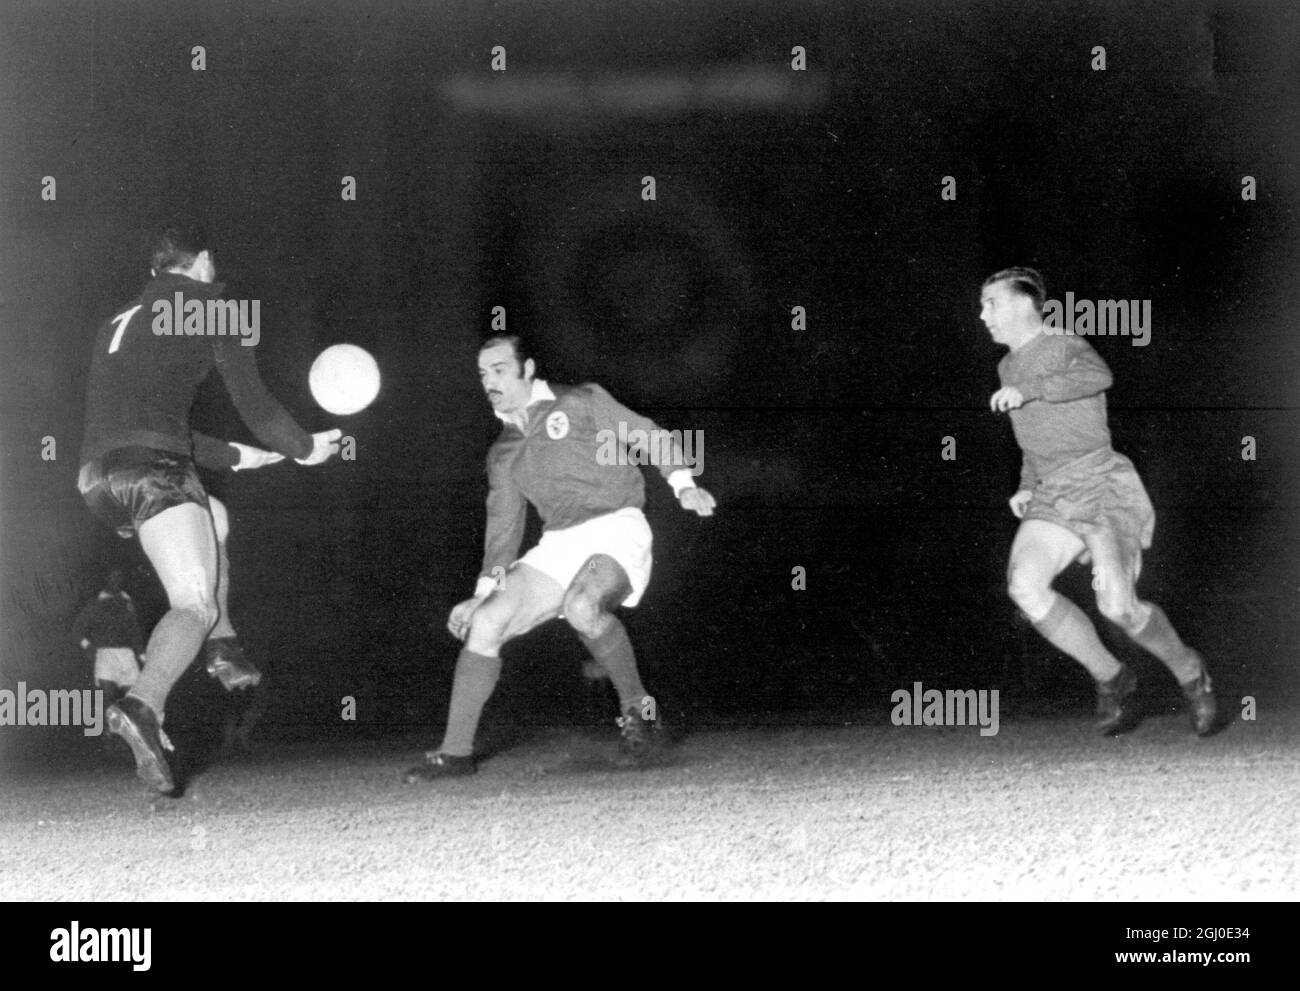 Real Madrid v Benfica Benfica goalkeeper Pereira (left) leaps to collect the ball and foil a Real Madrid attack during the European Cup Final in Amsterdam, Holland. Centre is Benfica's Germano, while right is Ferenc Puskas of Real Madrid, who scored all three goals for his team. Benfica became the European Champions with a 5-3 win. 3rd May 1962. Stock Photo